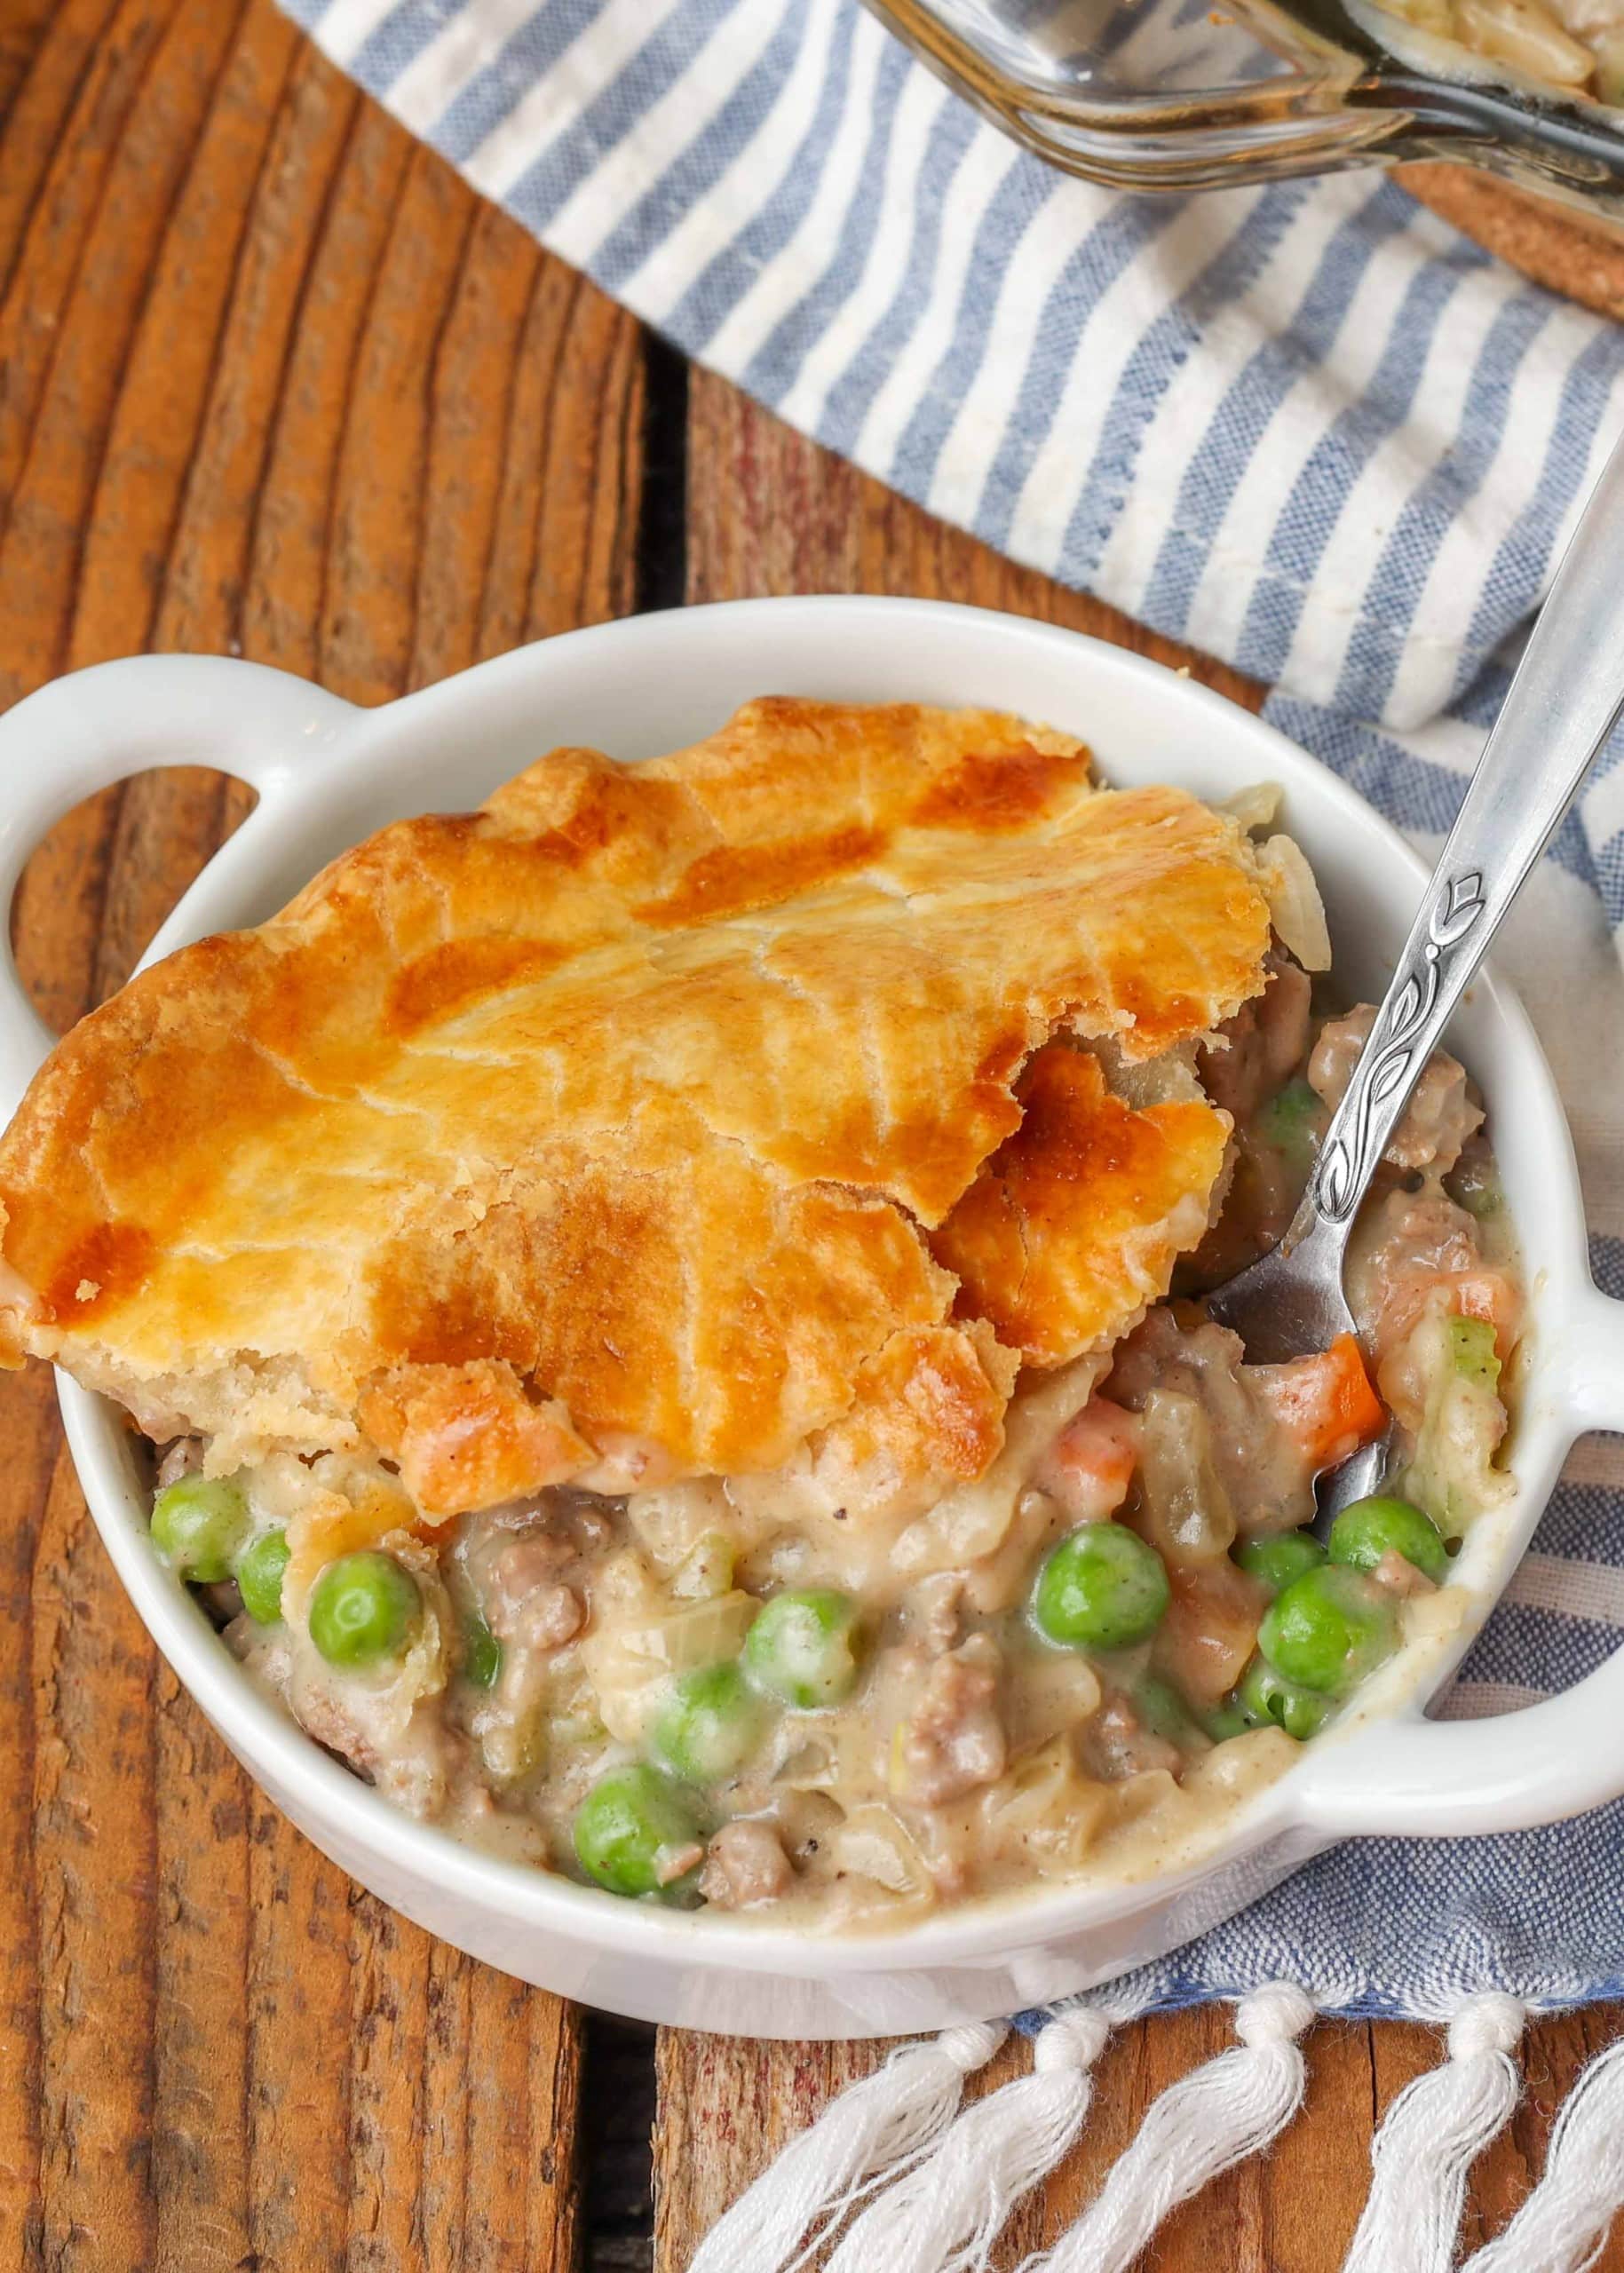 https://chocolatewithgrace.com/wp-content/uploads/2023/02/Ground-Beef-Pot-Pie-CWG-15-1-of-1-scaled.jpg